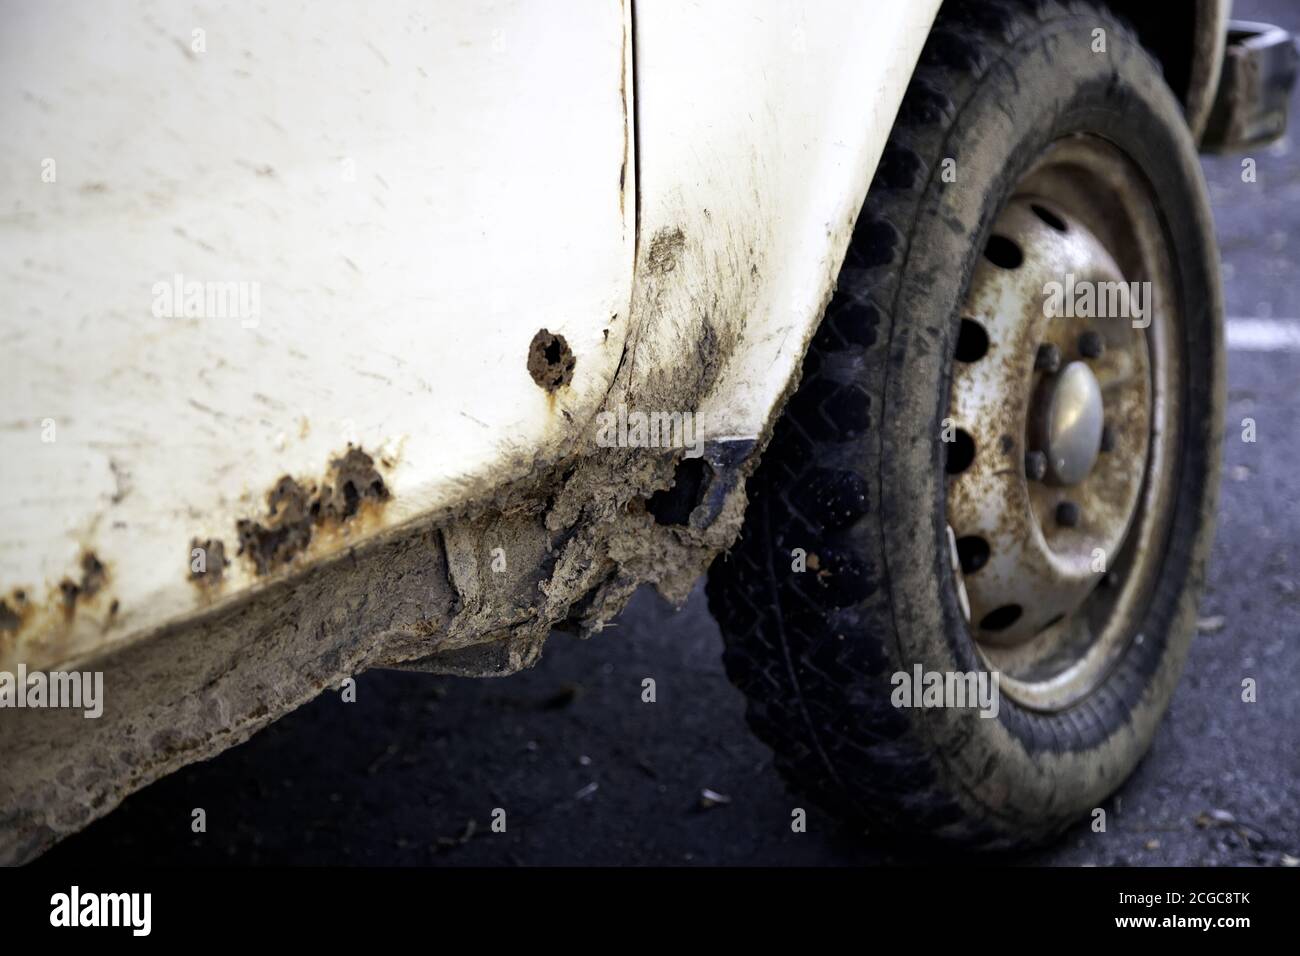 Muddy and rusty car wheels, transport and vehicle, travel Stock Photo